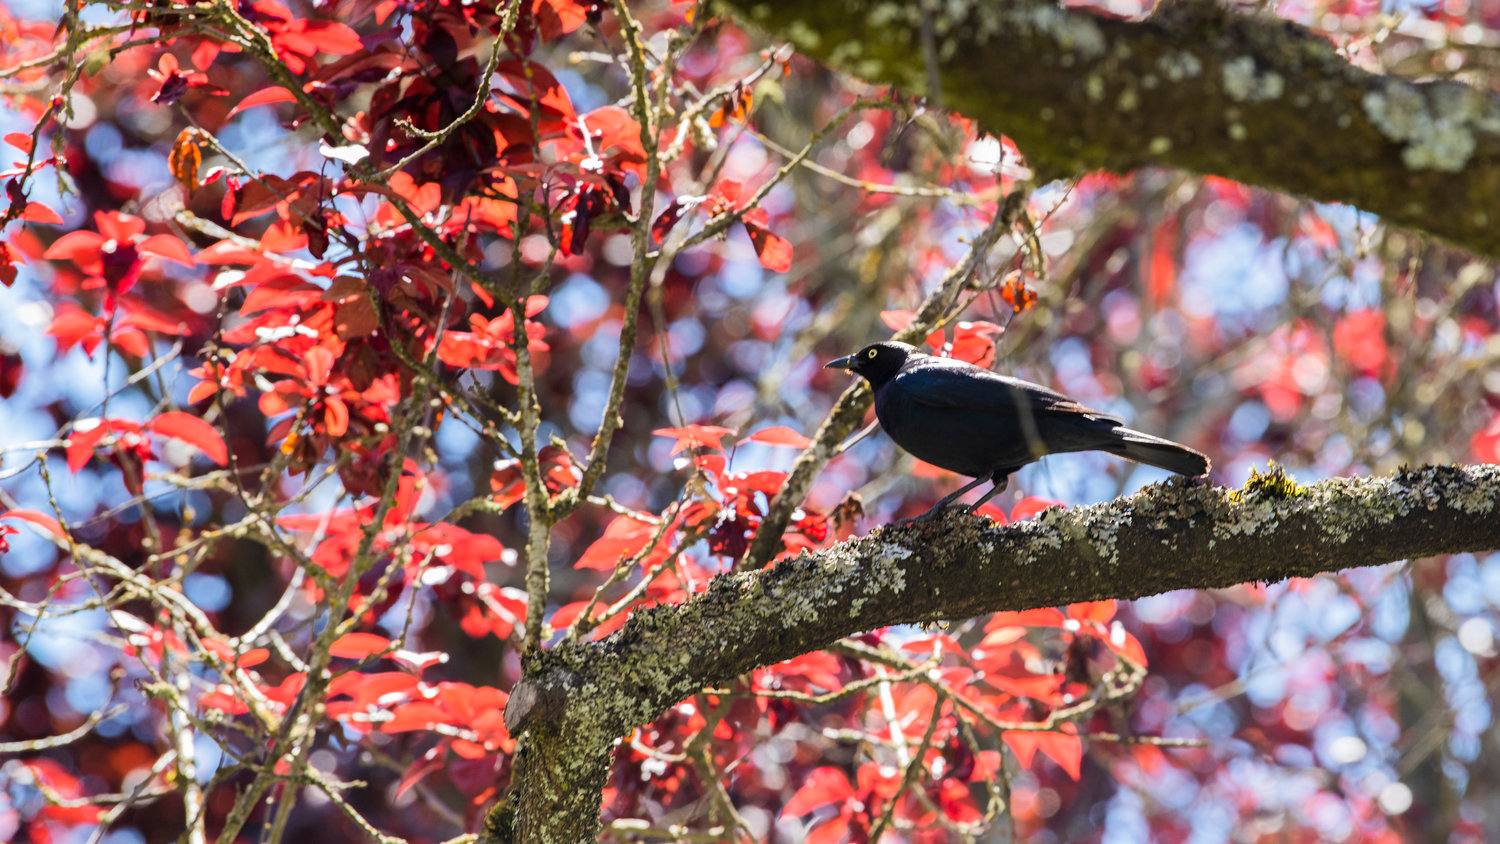 A Brewer’s blackbird prepares to take flight from a tree in front of Chehalis City Hall Thursday afternoon.